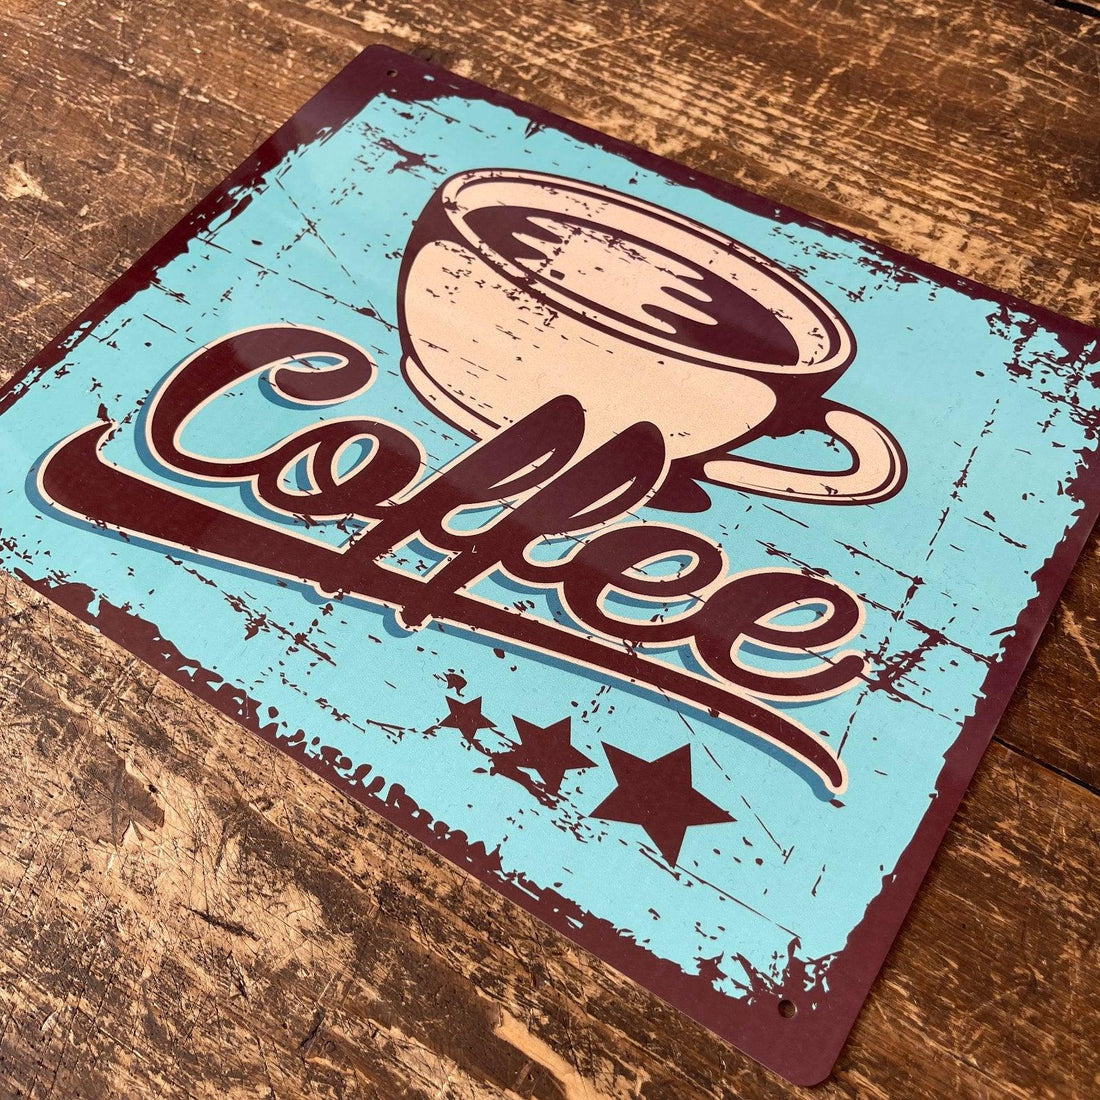 Vintage Metal Sign - Retro Coffee Sign - £18.99 - Signs & Rules 